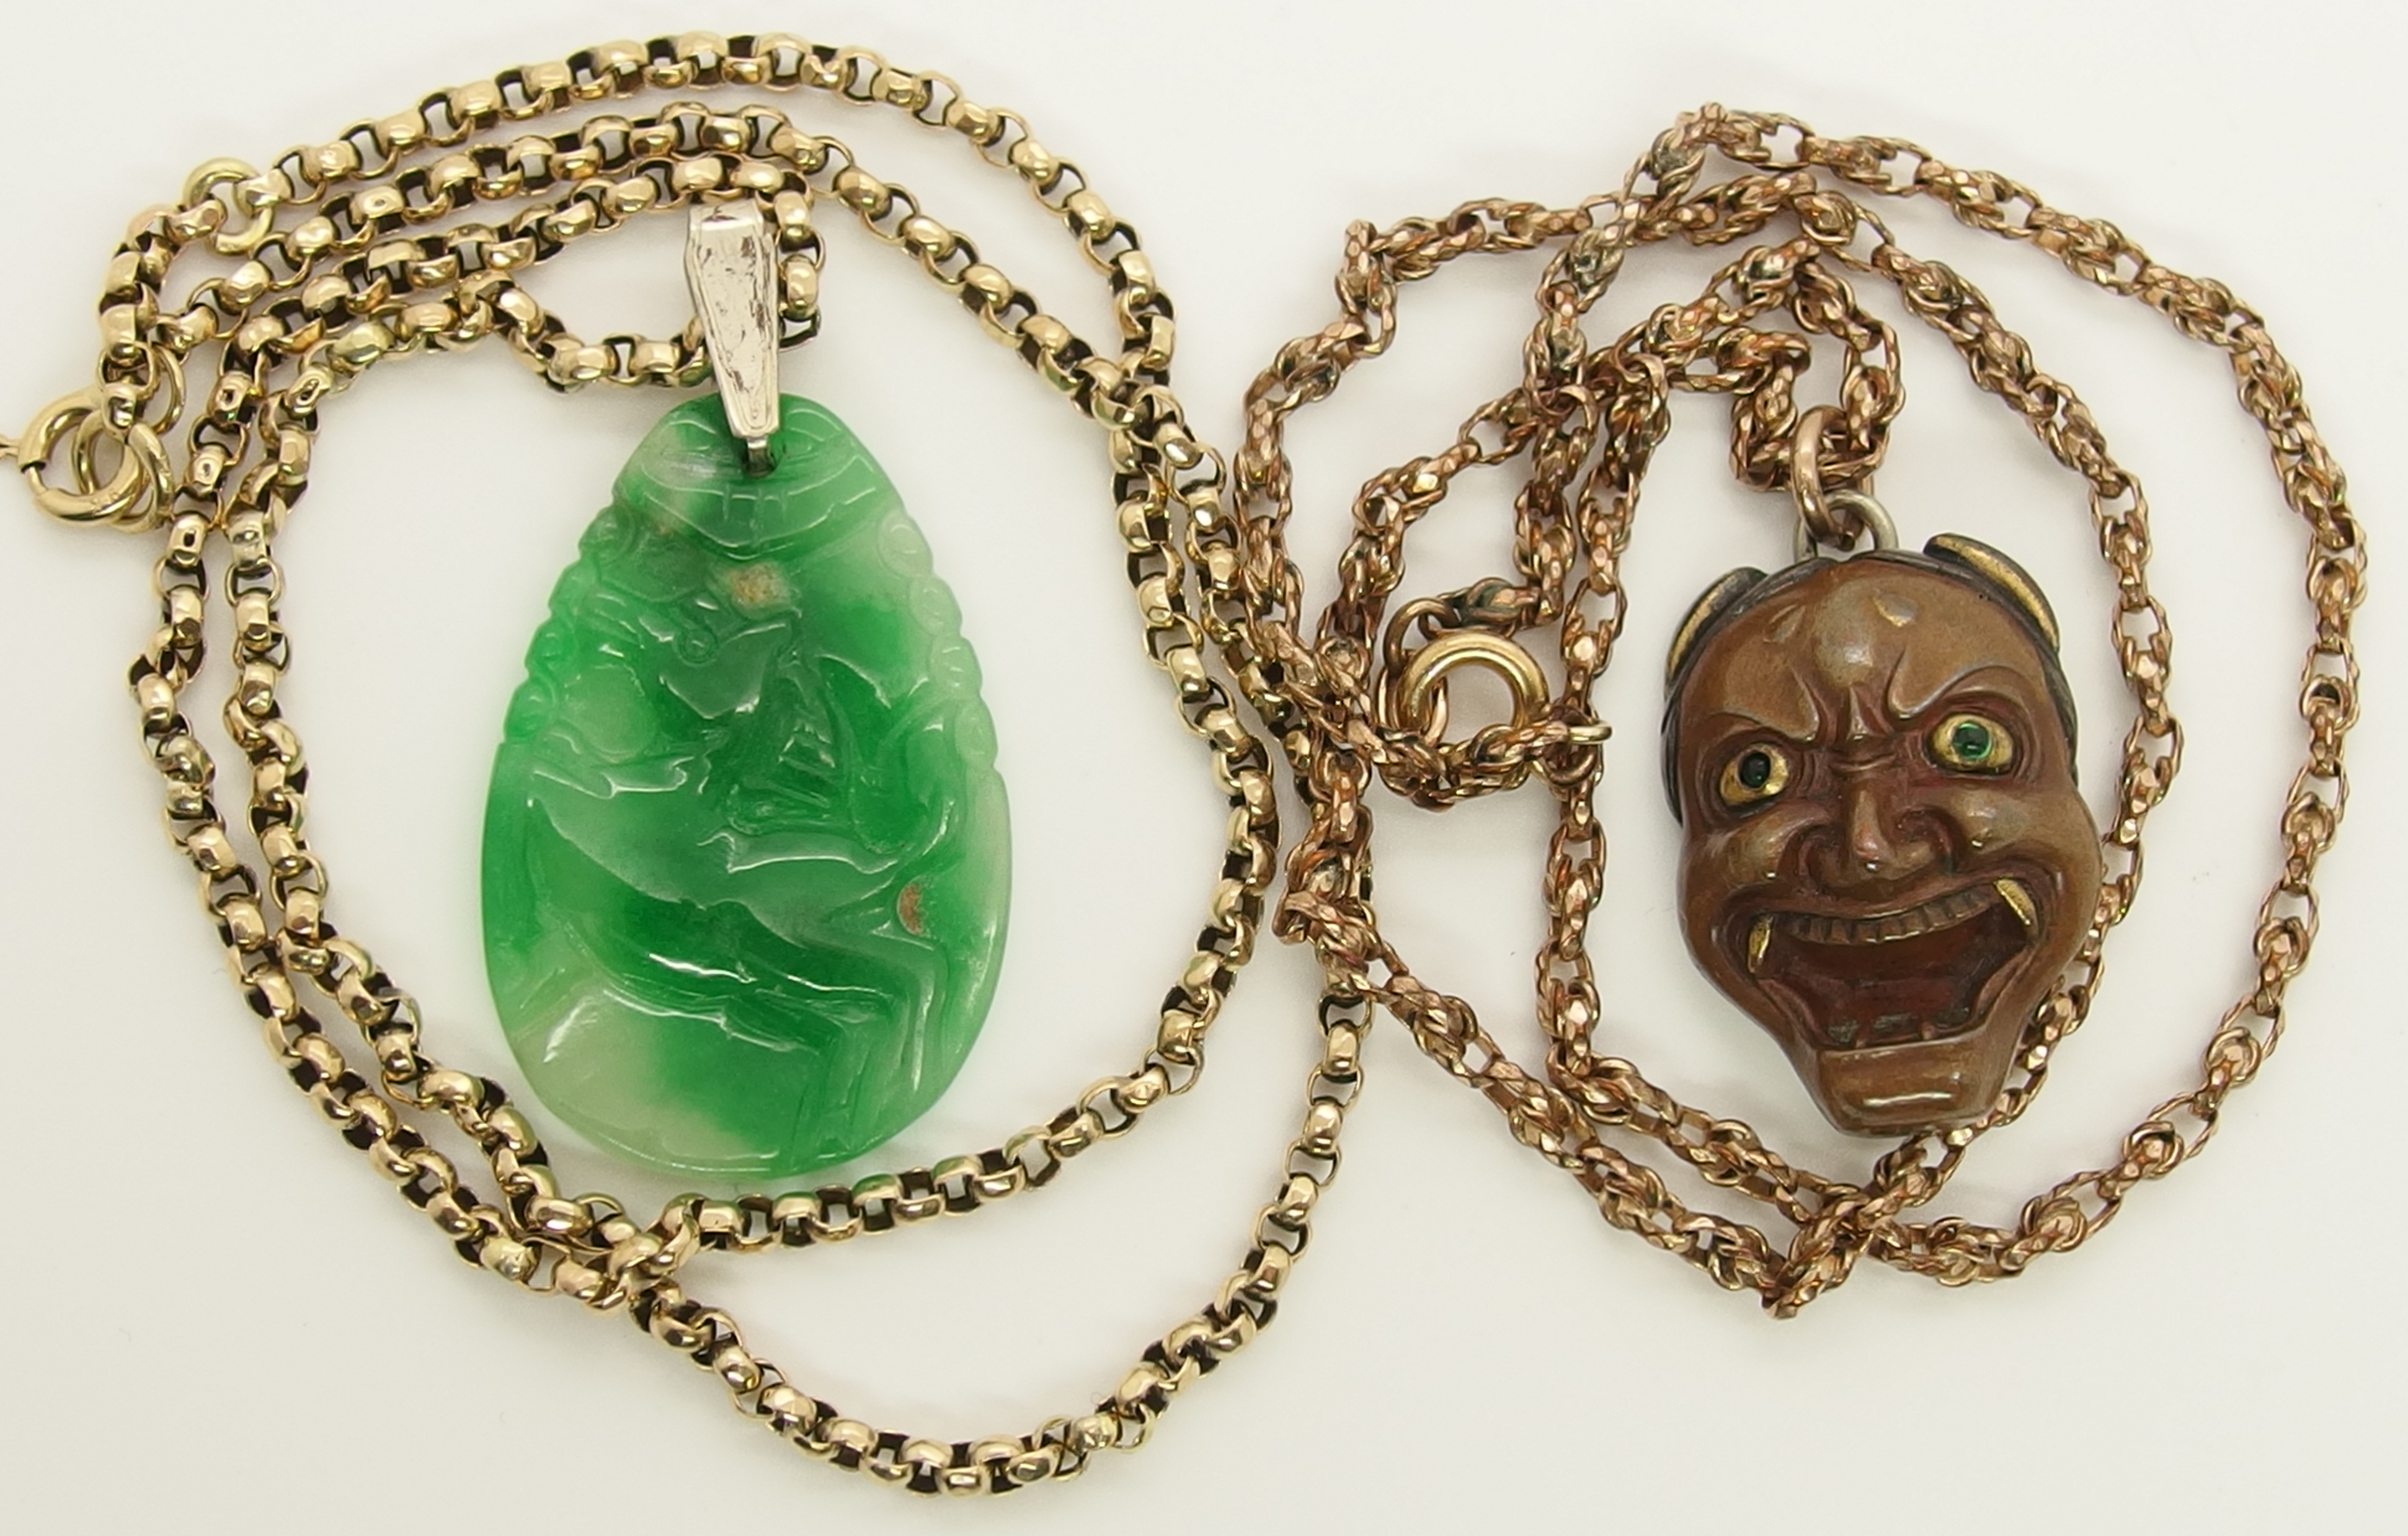 A Chinese green hardstone pendant and a Japanese demon mask pendant the hardstone pendant is